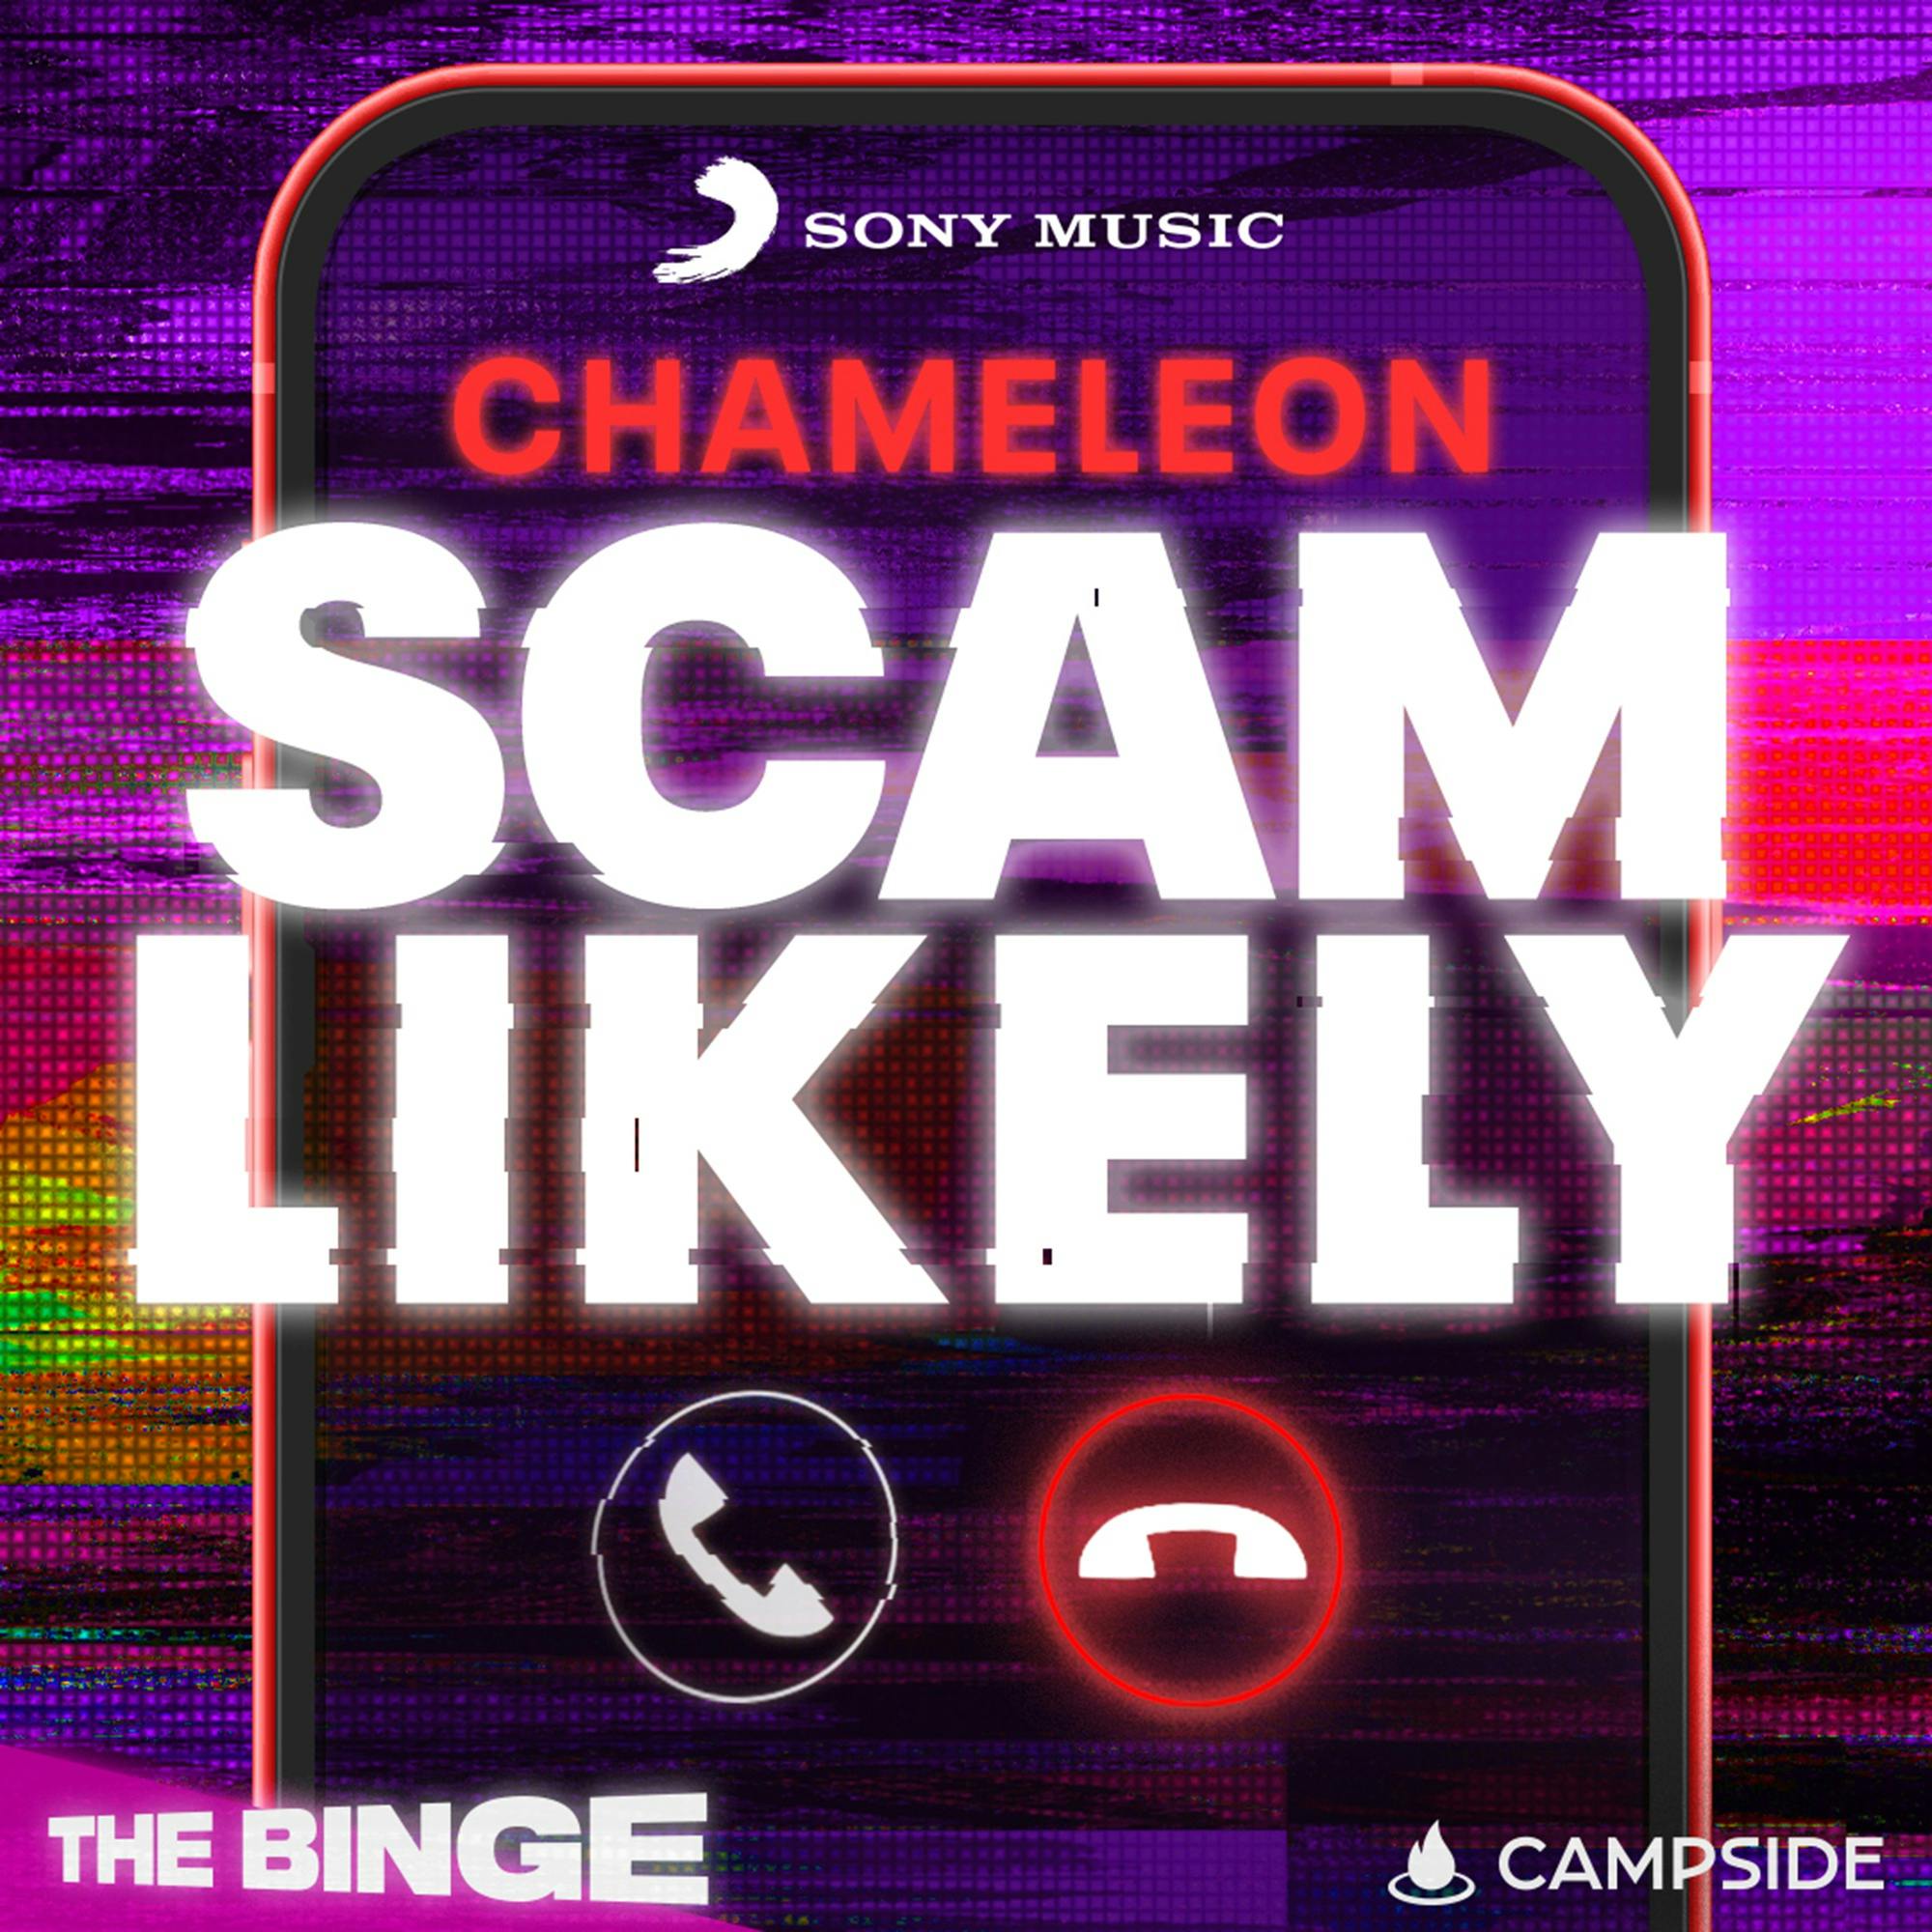 Introducing Season Four of Chameleon: Scam Likely